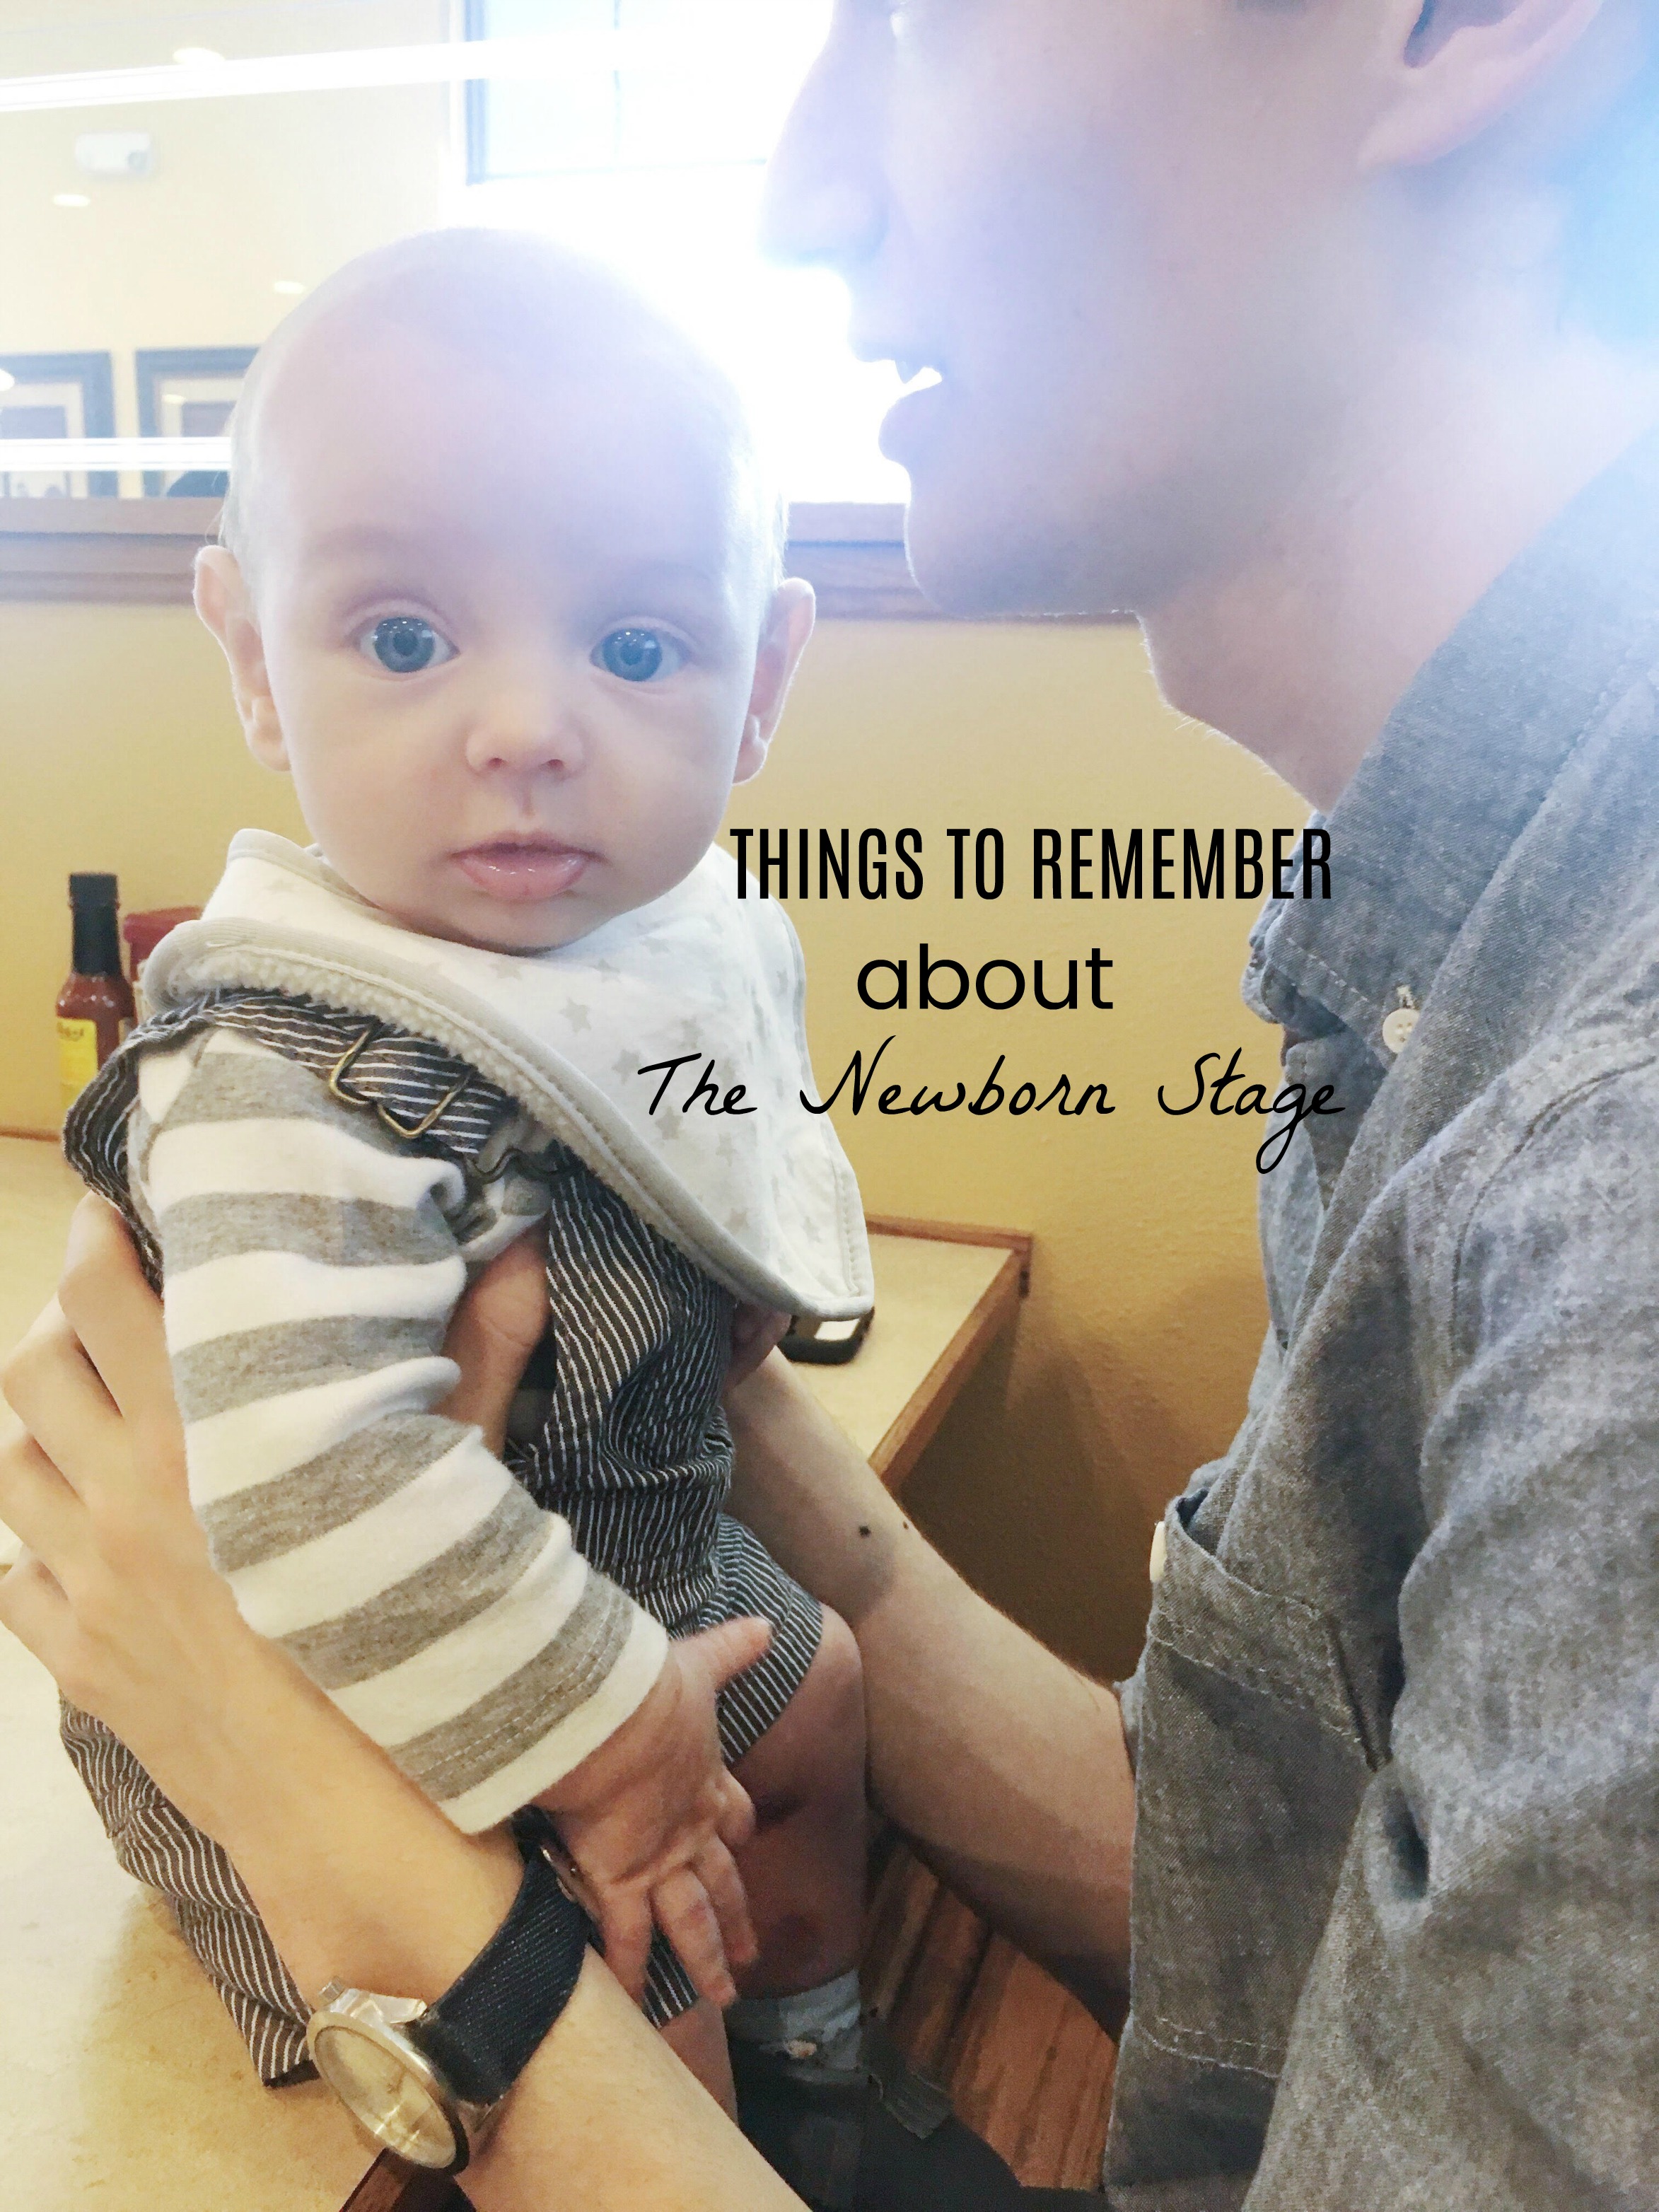 Things to Remember: The Newborn Stage